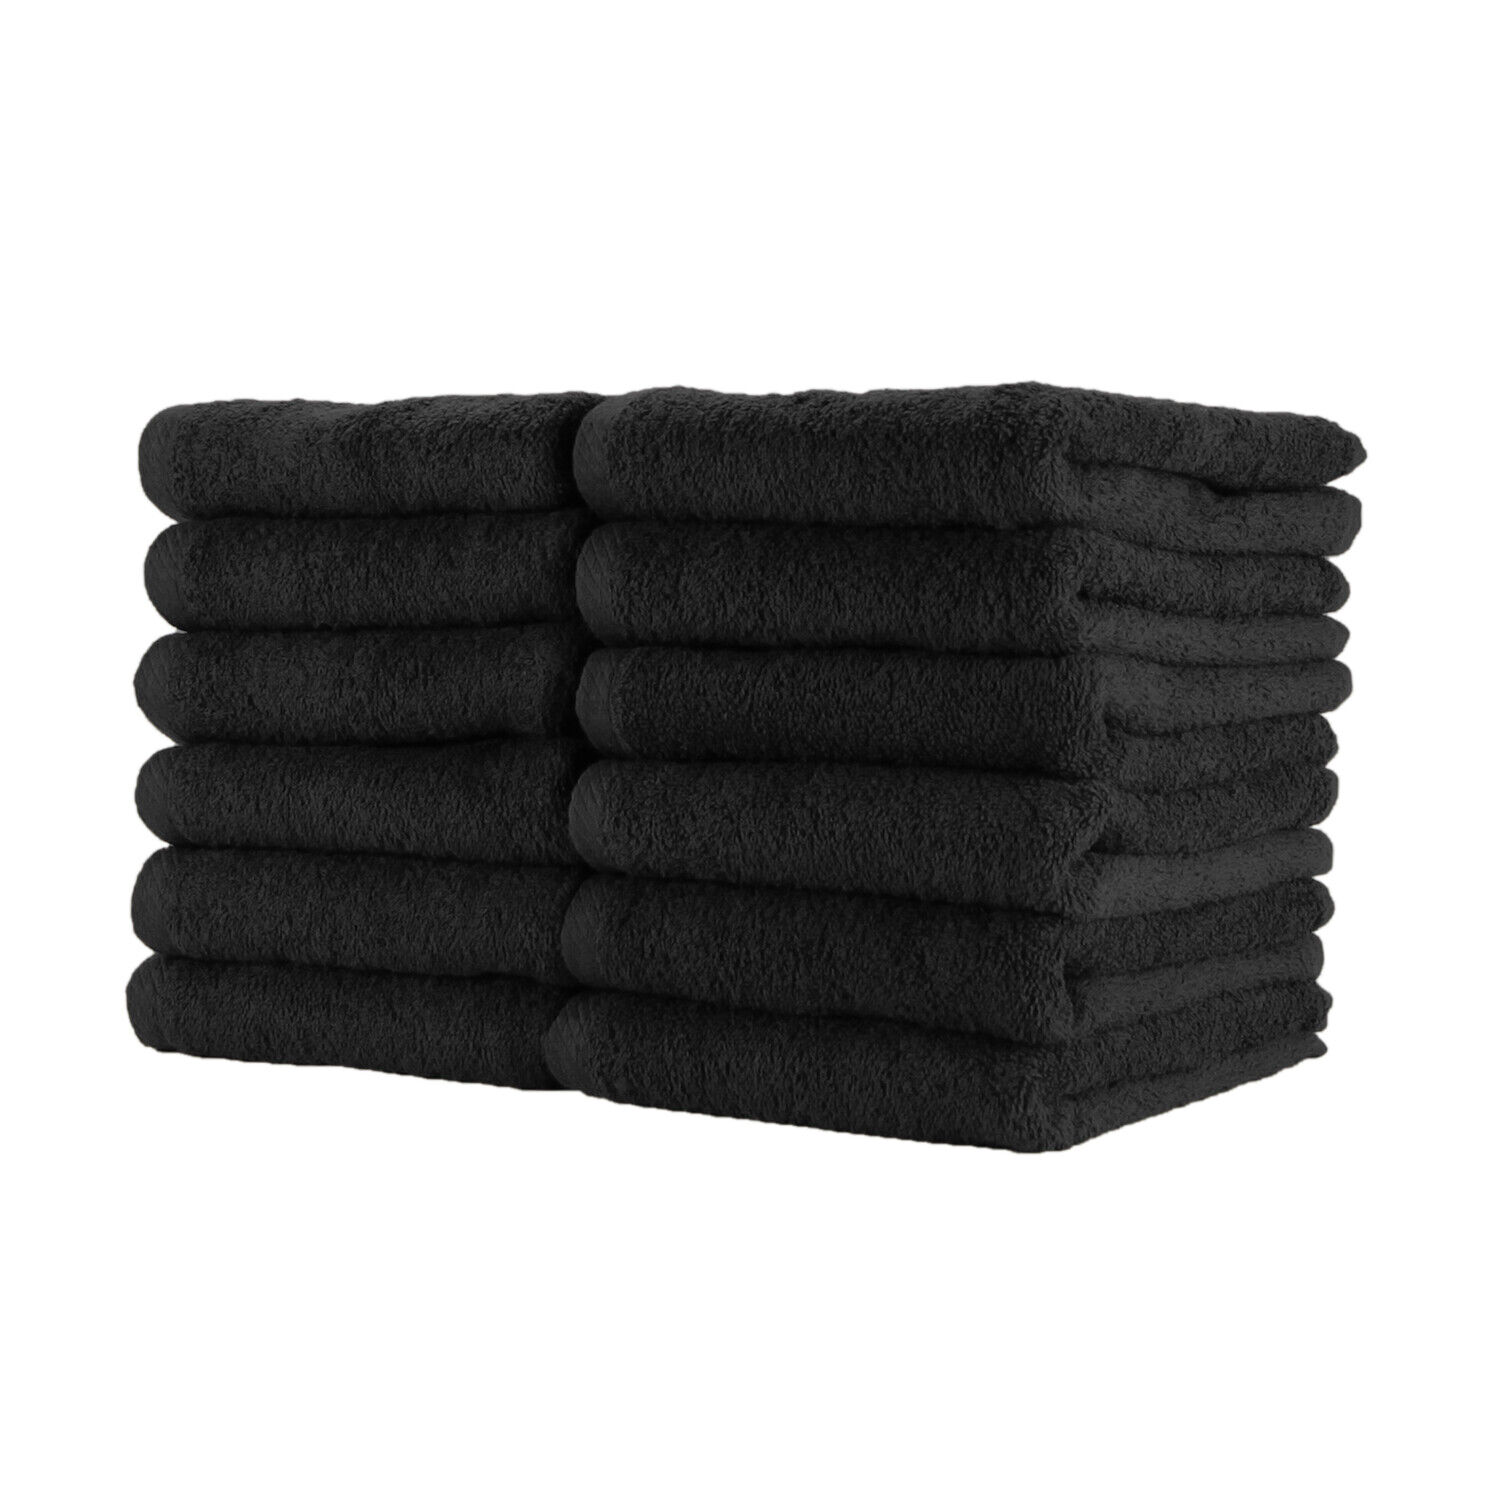 Salon Towels - Packs of 12 - Bleach Safe 16 x 27 Cotton Towel - Color Options  Arkwright Does Not Apply - фотография #4